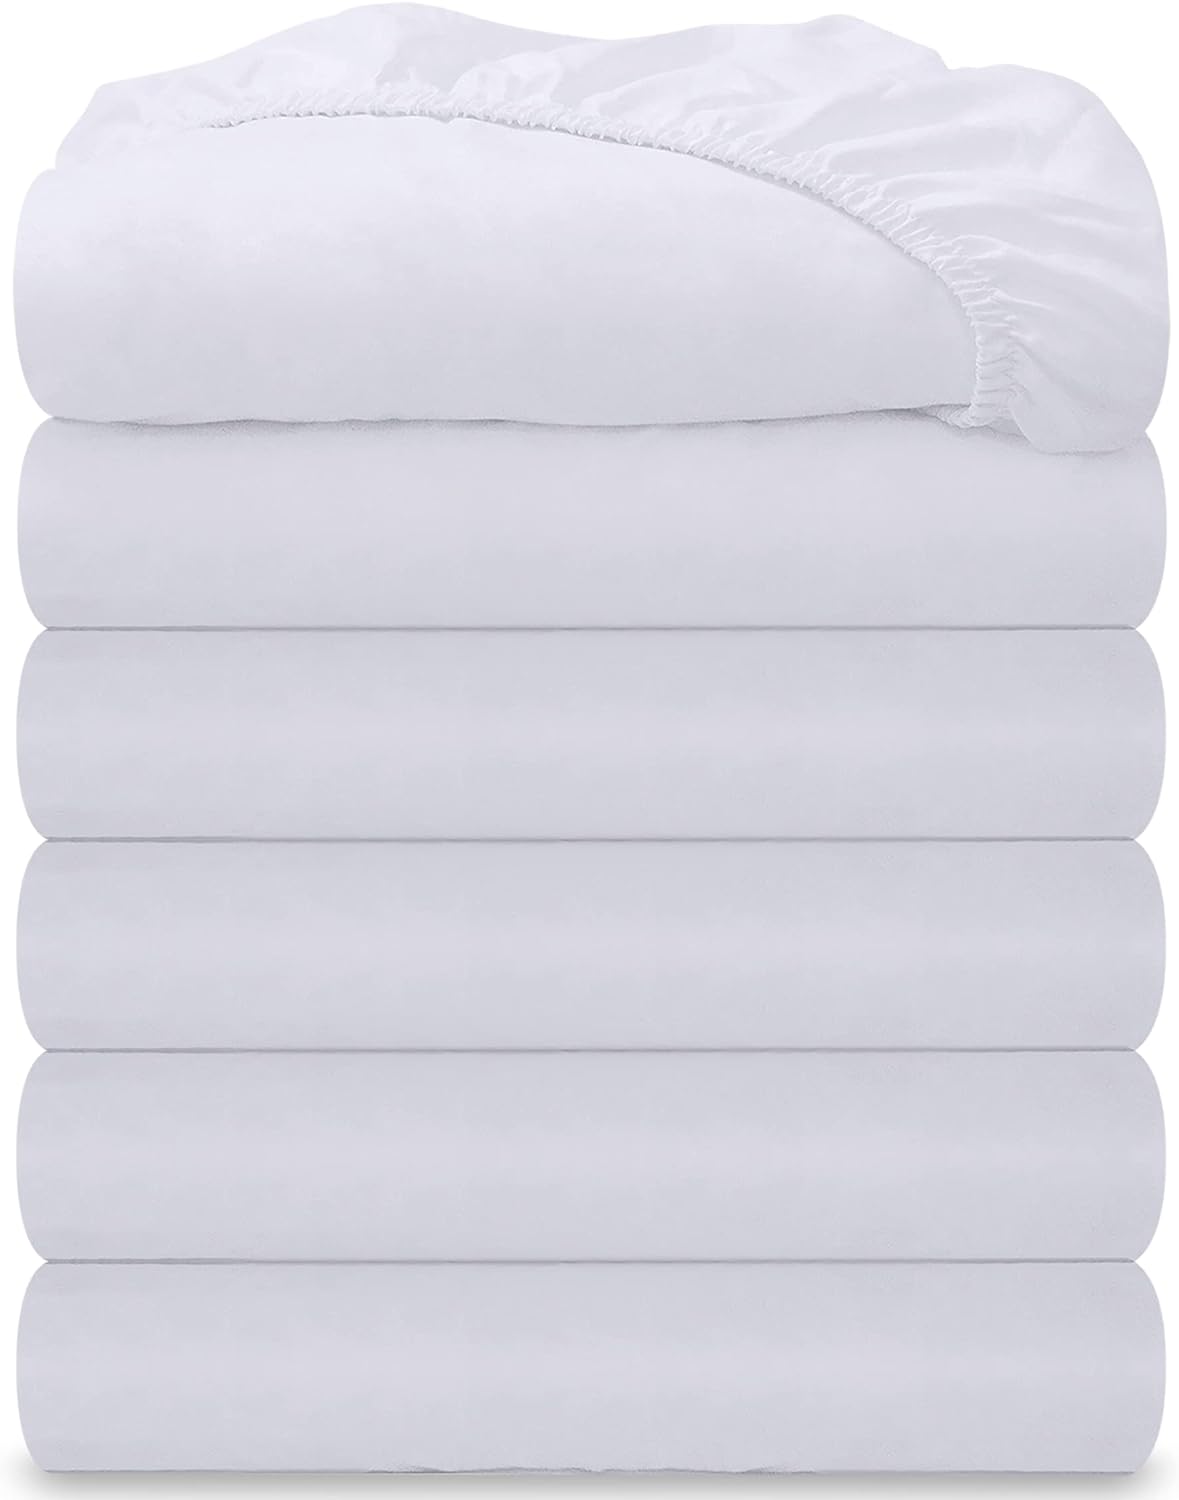 Royale Linens 6 Pack Queen Fitted Sheet Set - Bottom Sheet - Ultra Soft & Breathable - Brushed 1800 Microfiber - Wrinkle & Stain Resistant - Hotel Quality Deep Pocket Stretch Up to 16" (Queen, White)